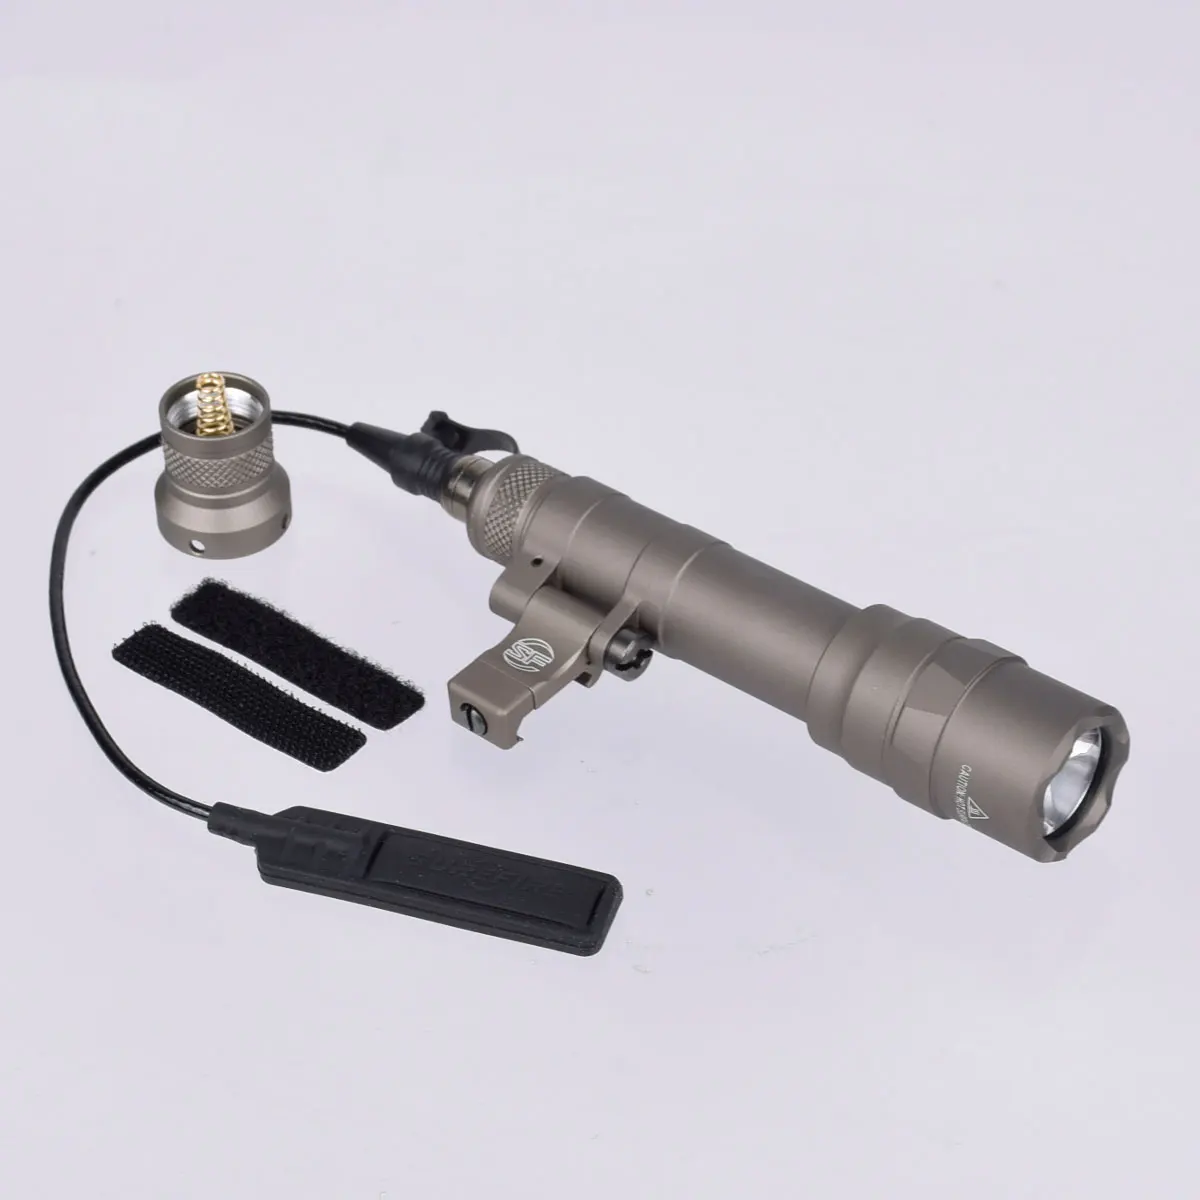 1500 Lumens M600 M640DF Offset Weapon Light Dual Fuel Constant Momentary Output Rifle Sout Night Remote Lighting Offset Mount